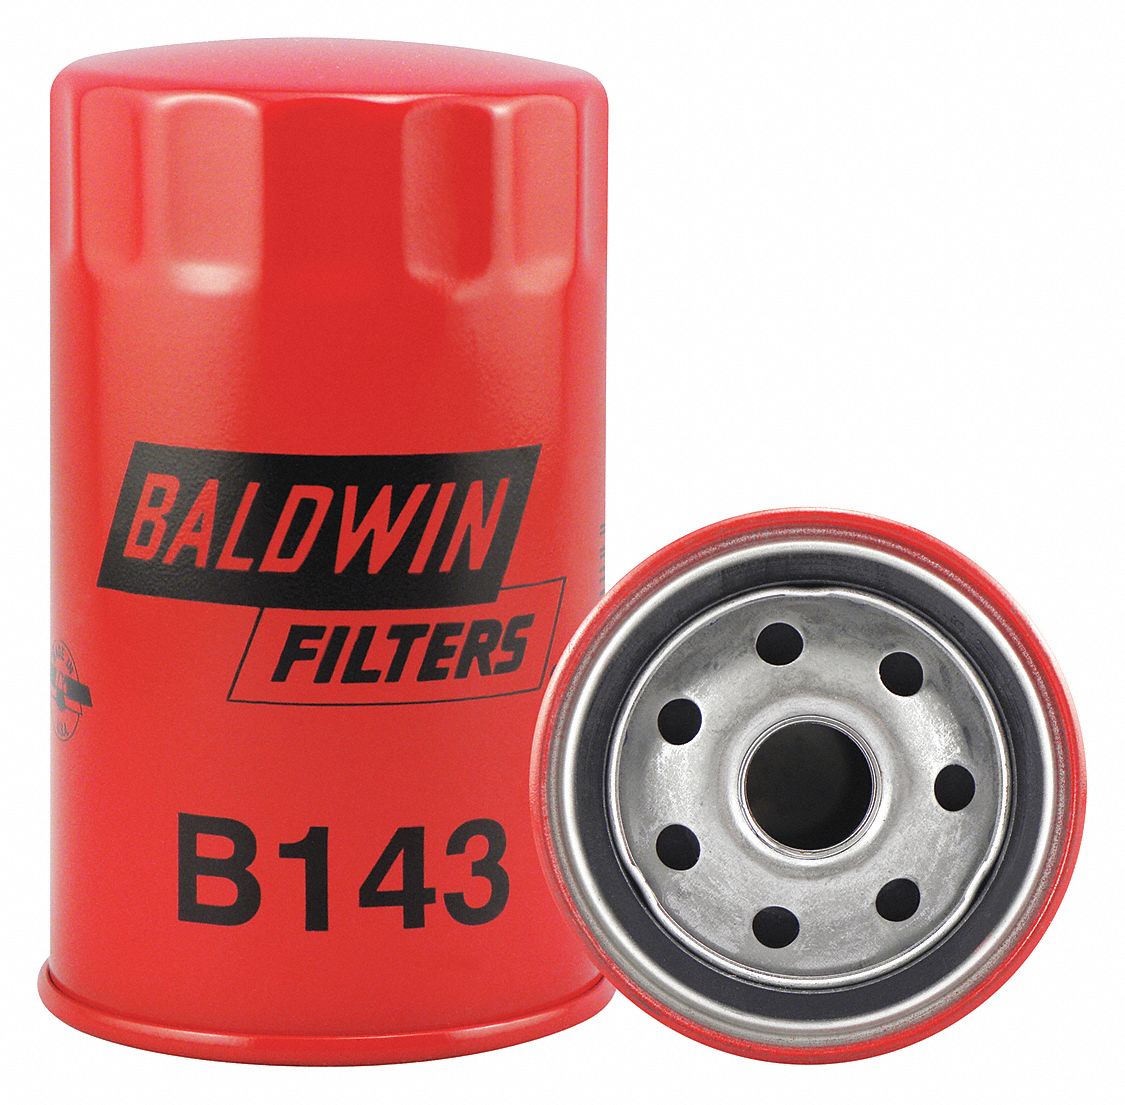 BALDWIN FILTERS  Spin On Oil  Filter  Length 5 3 32 